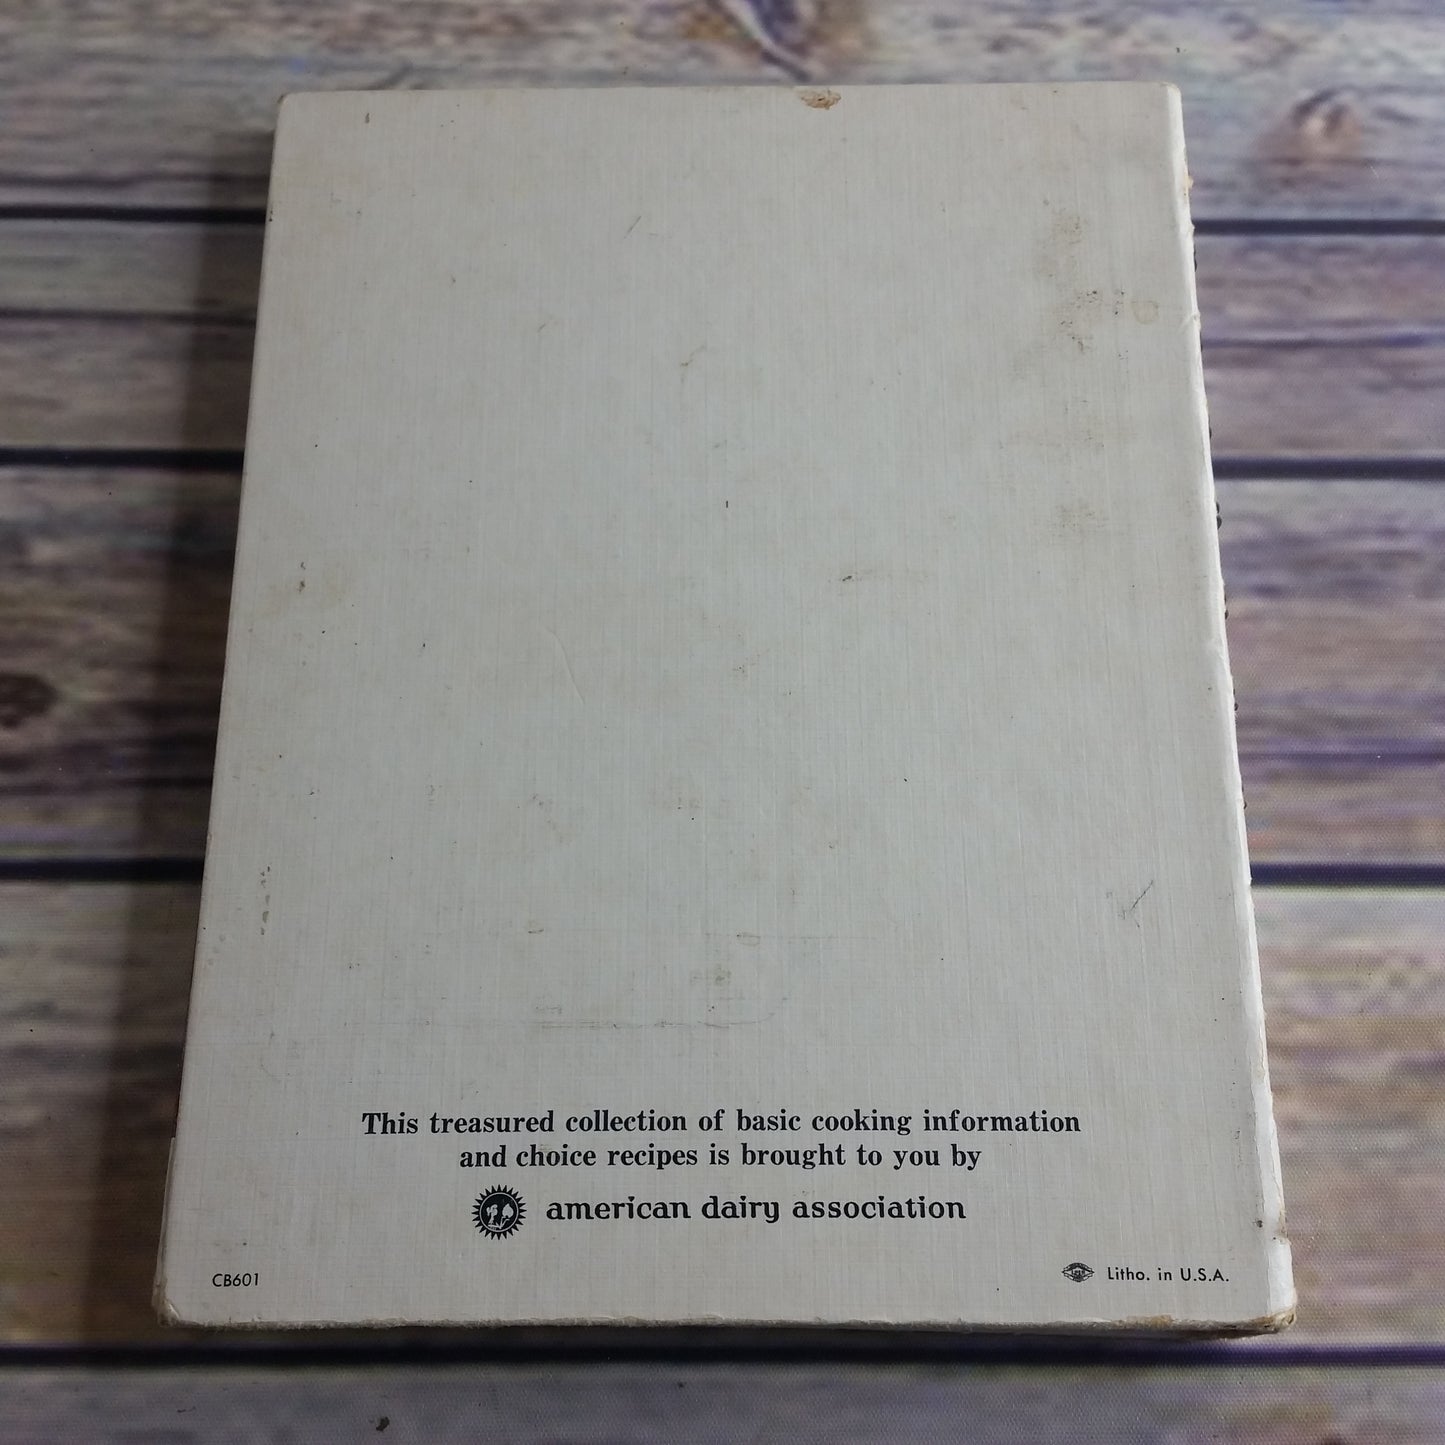 Vintage Illinois Cookbook Modern Approach to Everyday Cooking 500 Recipes American Dairy Association 1966 Spiral Bound Hardcover